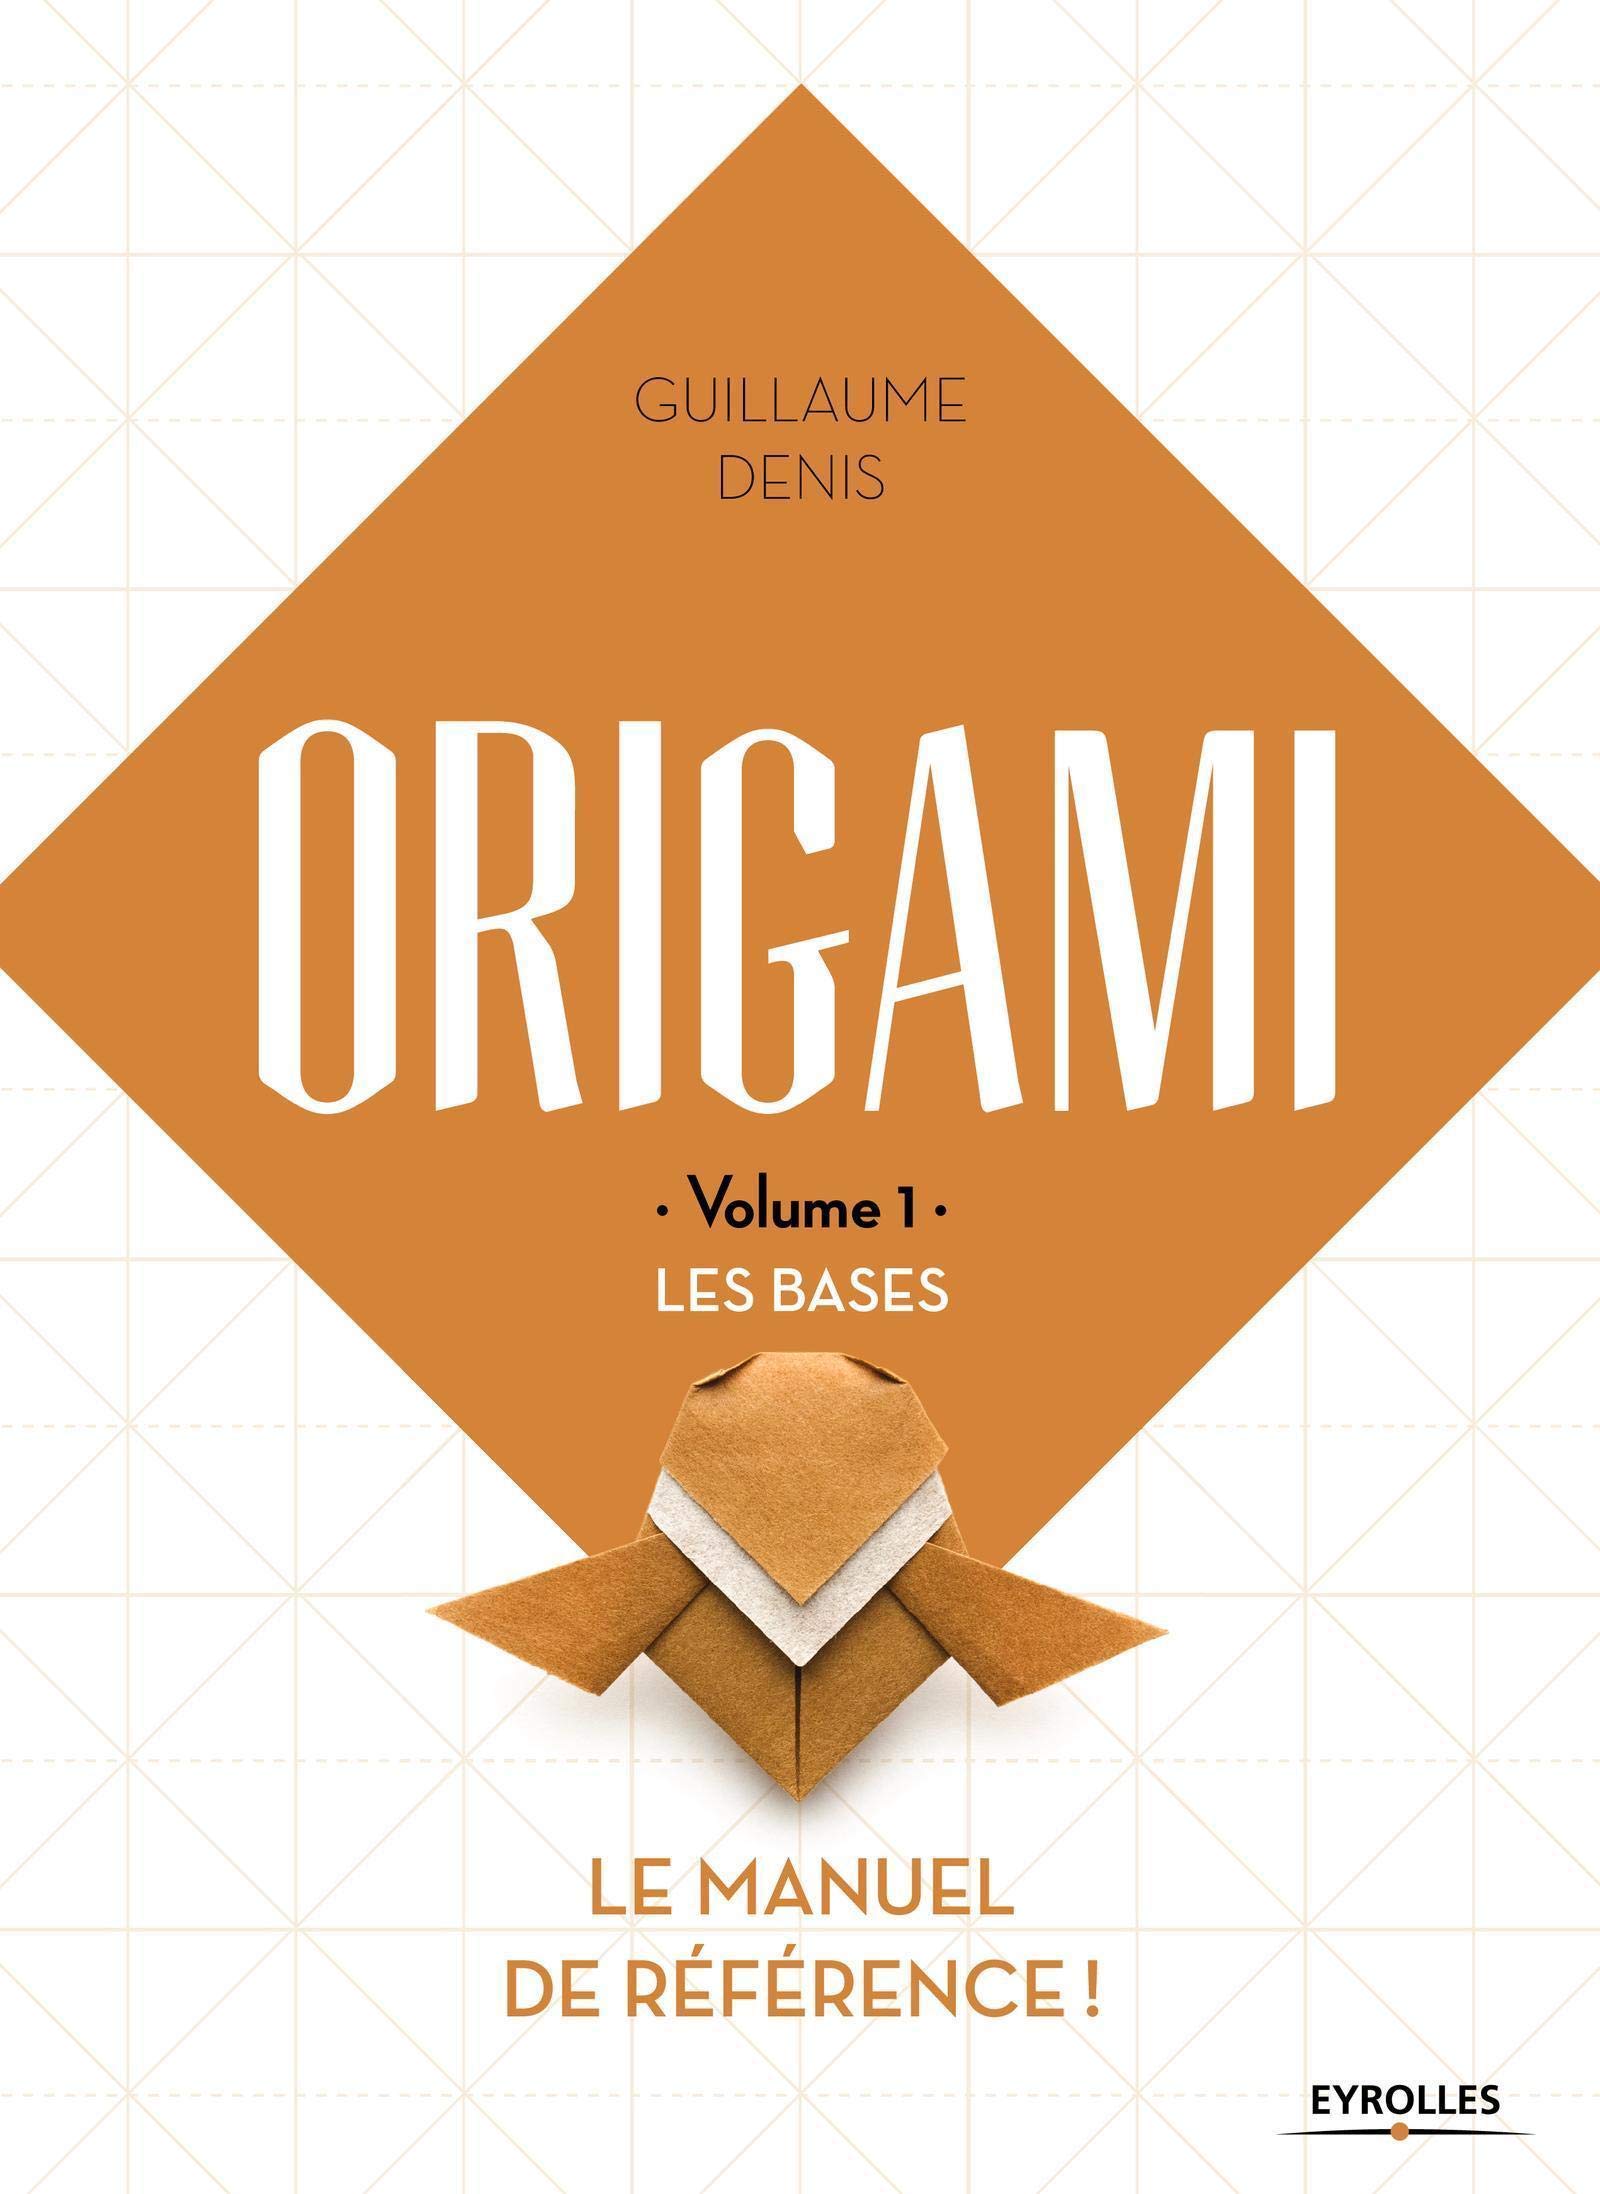 ORIGAMI - Volume 1 - LES BASES : page 105.